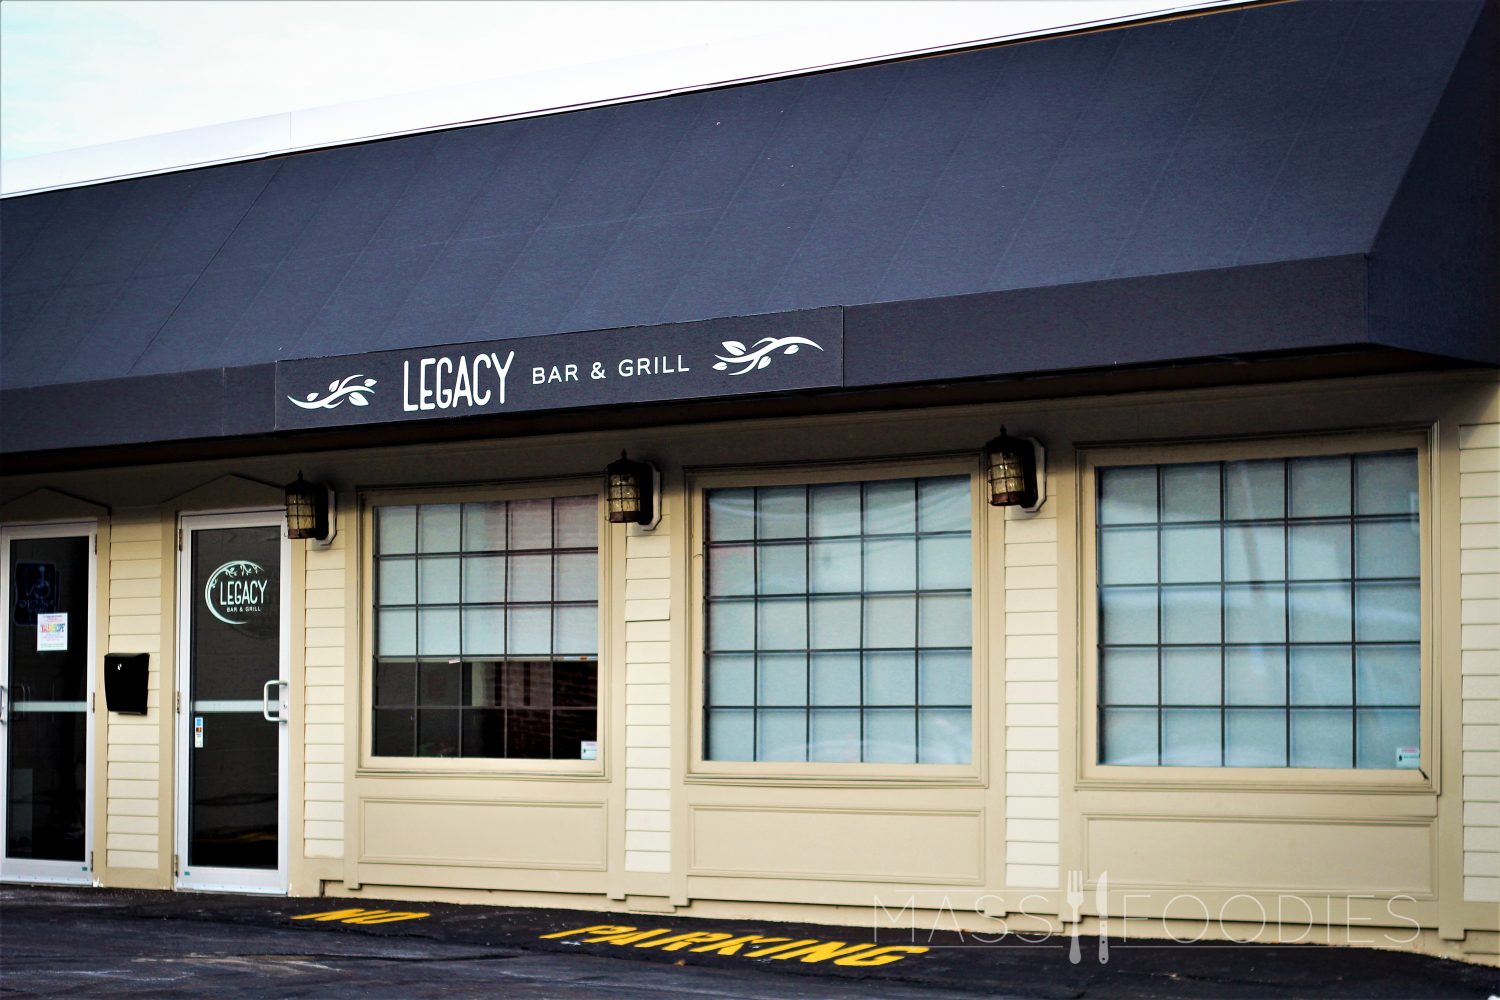 The facade of Legacy Bar & Grill at Coe's Pond on Mill Street in Worcester, MA.